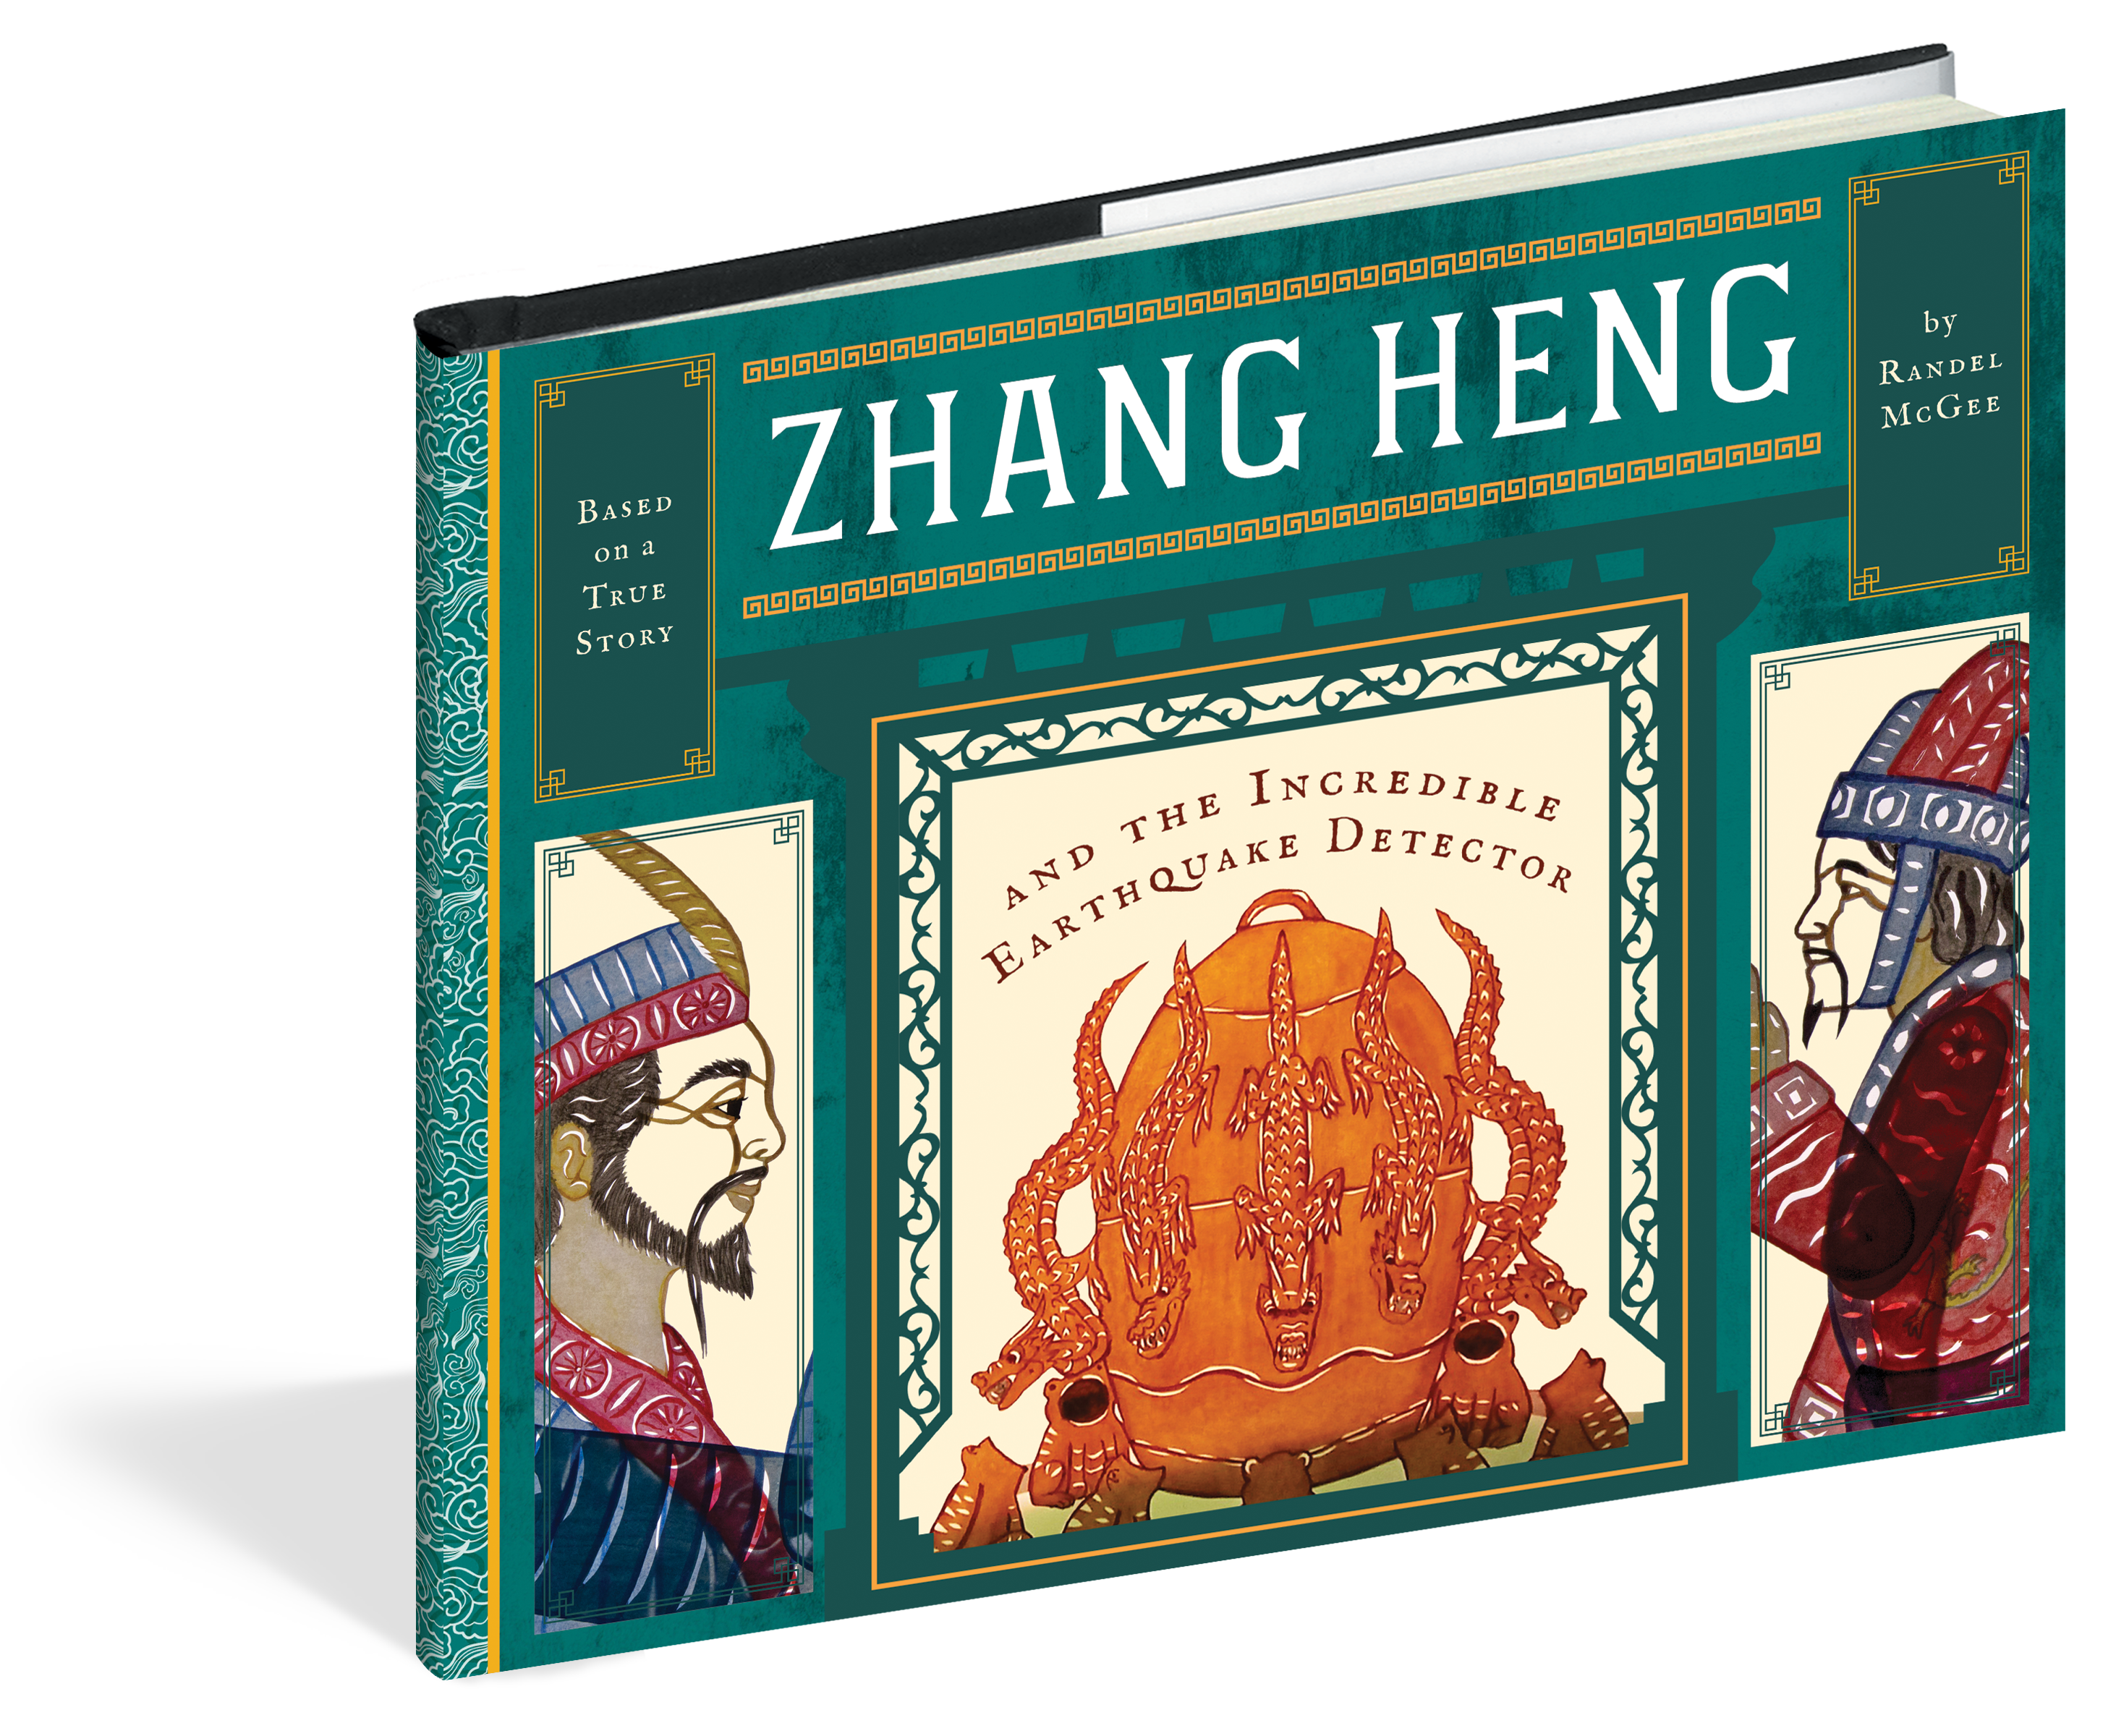 The cover of the picture book Zhang Heng and the Incredible Earthquake Detector.